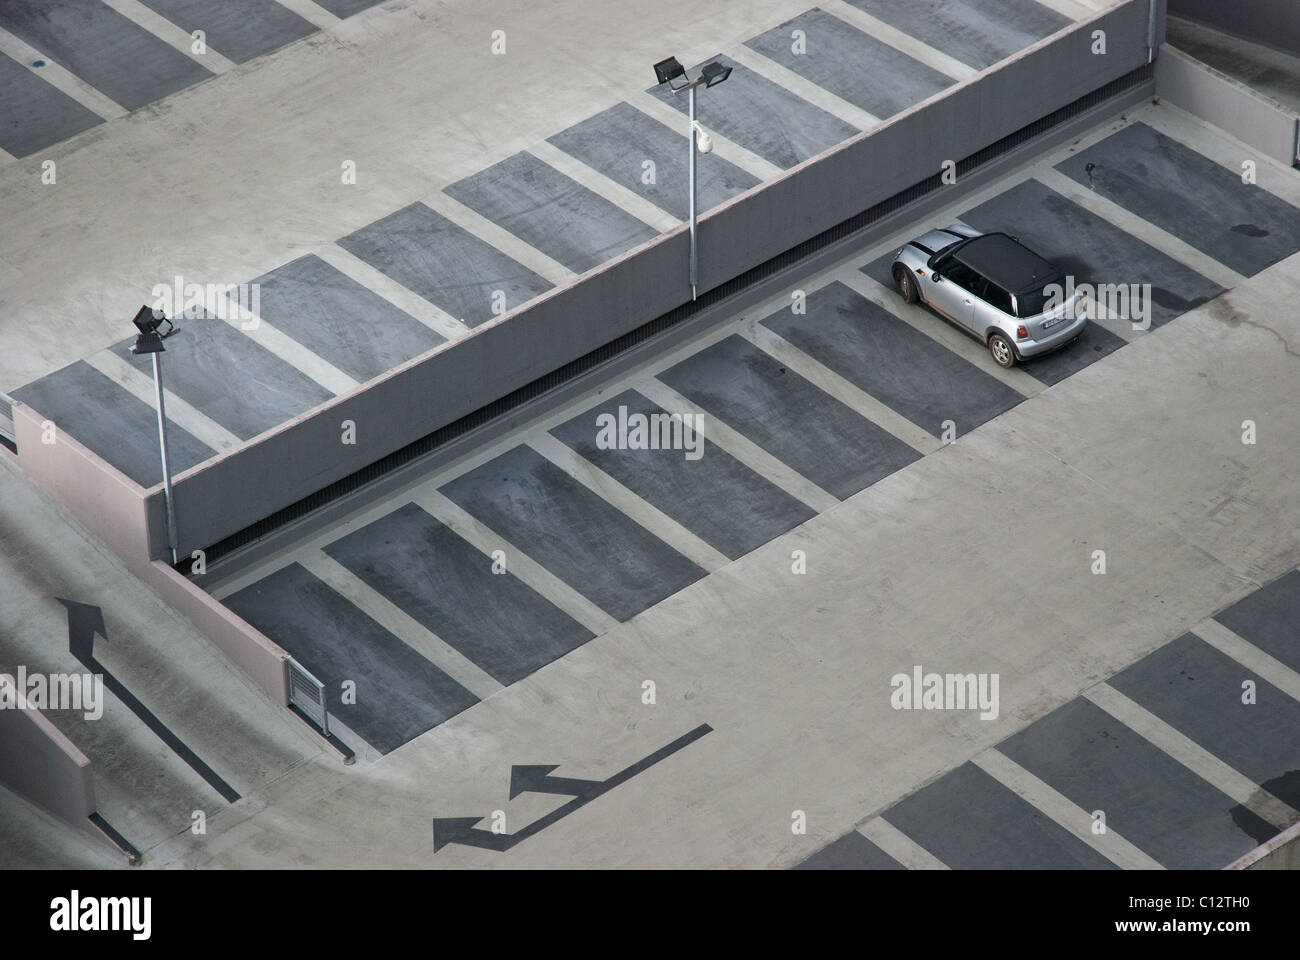 Car park in Ireland, Cork, elevated view Stock Photo